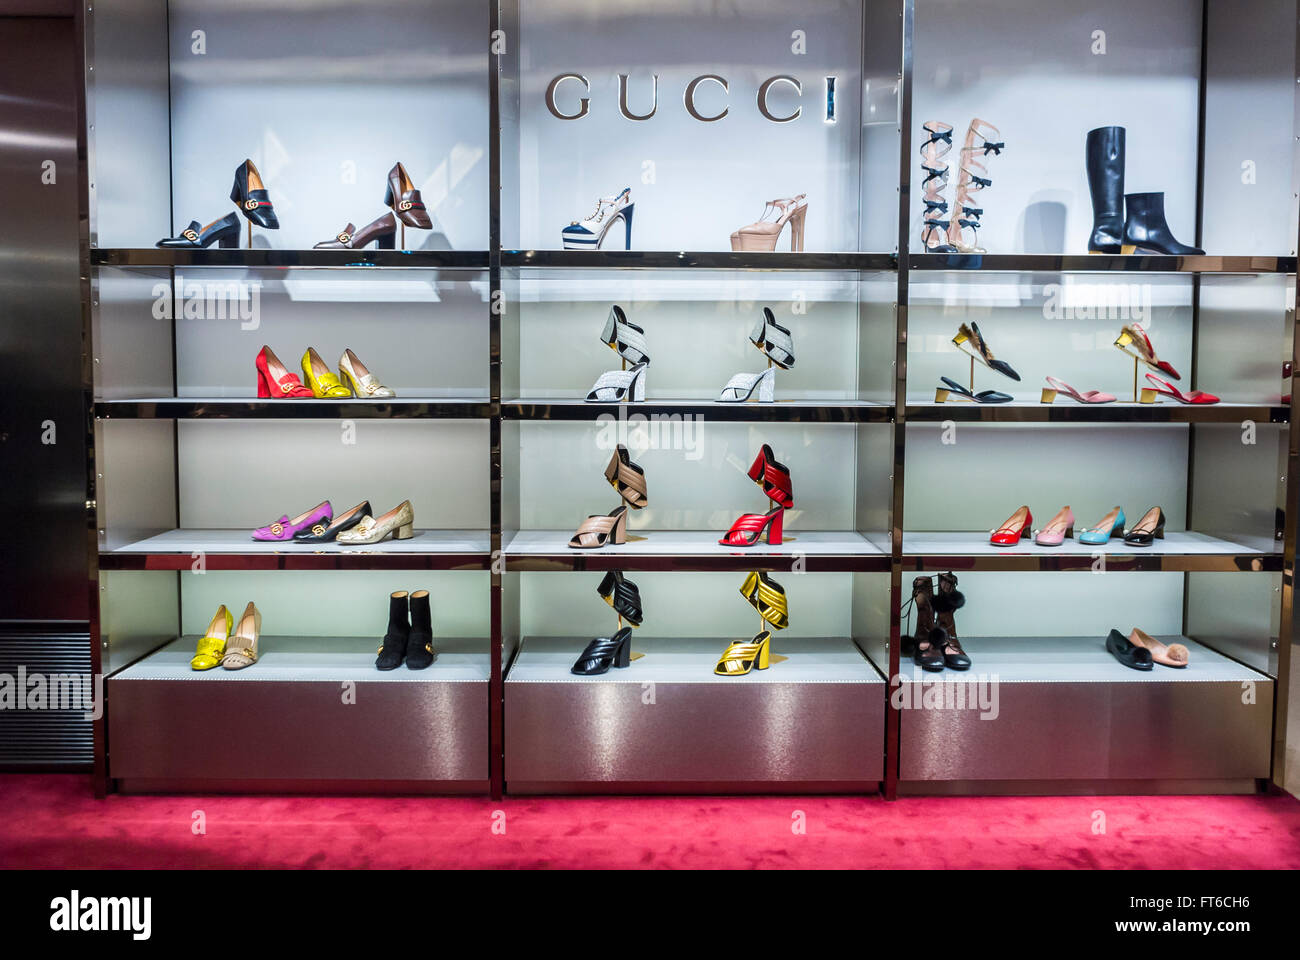 Paris, France, Shopping, French Department Store, Le Printemps, Gucci  Luxury Brand, Women's designer Shoes on Display, Shelves, shopping shoes  Stock Photo - Alamy